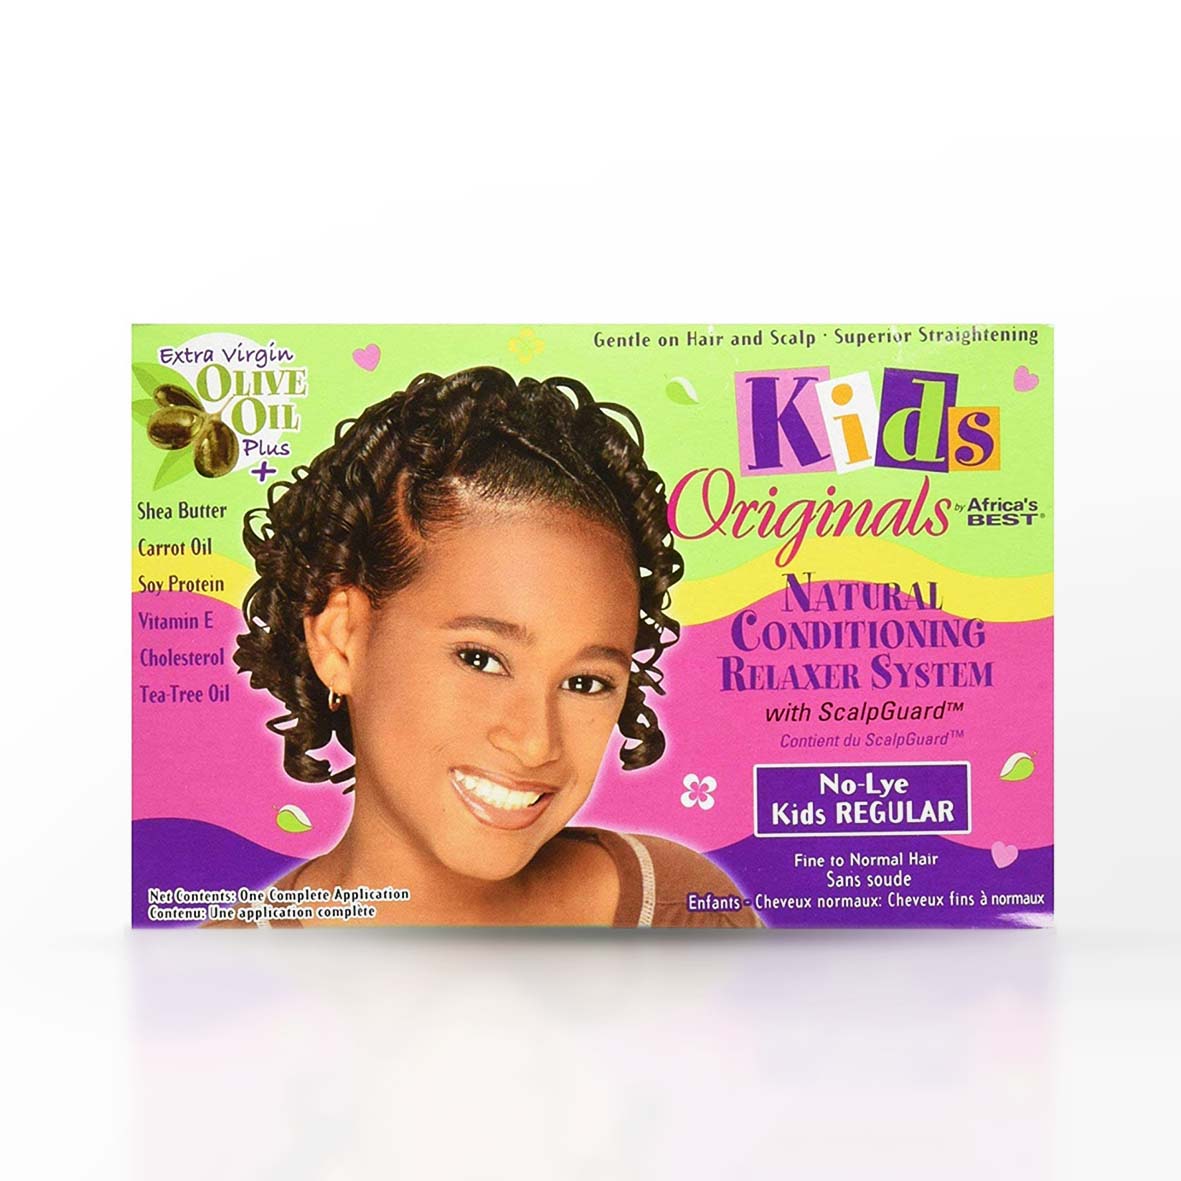 AFRICAS BEST KIDS ORIGINAL NATURAL CONDITIONING RELAXER SYSTEM